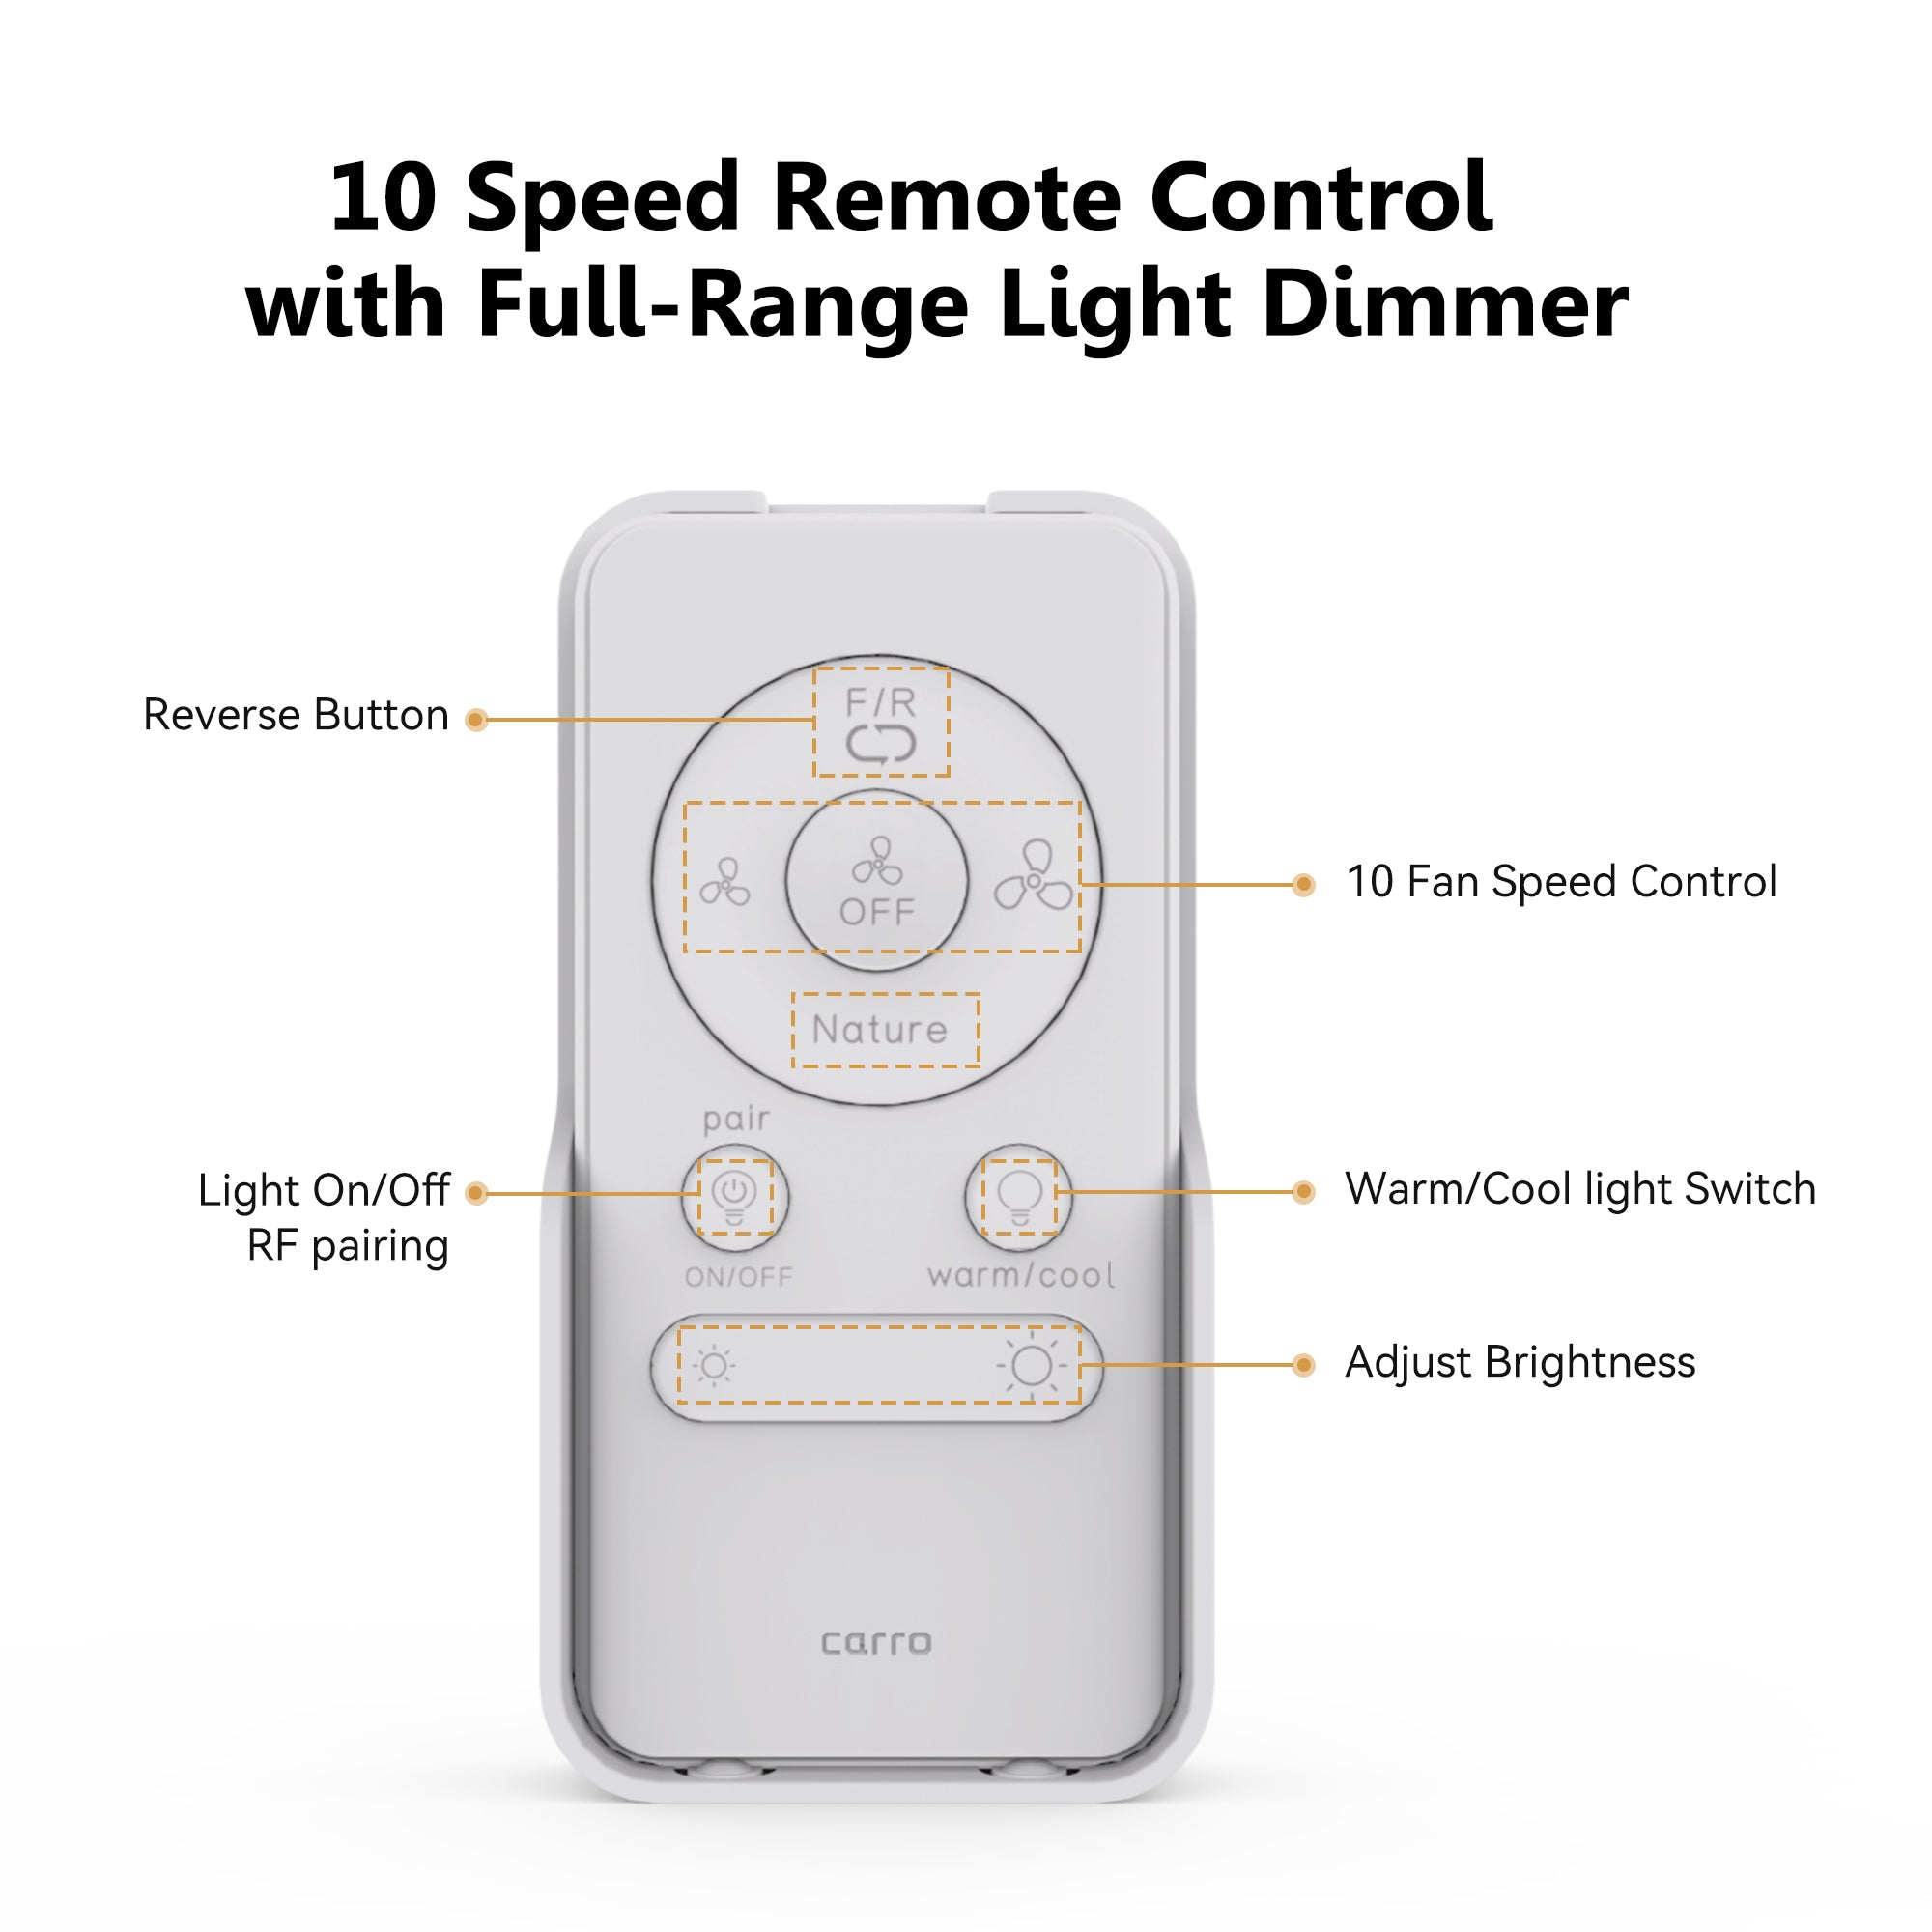 Smafan Carro 10 speed remote control with full-range light dimmer.